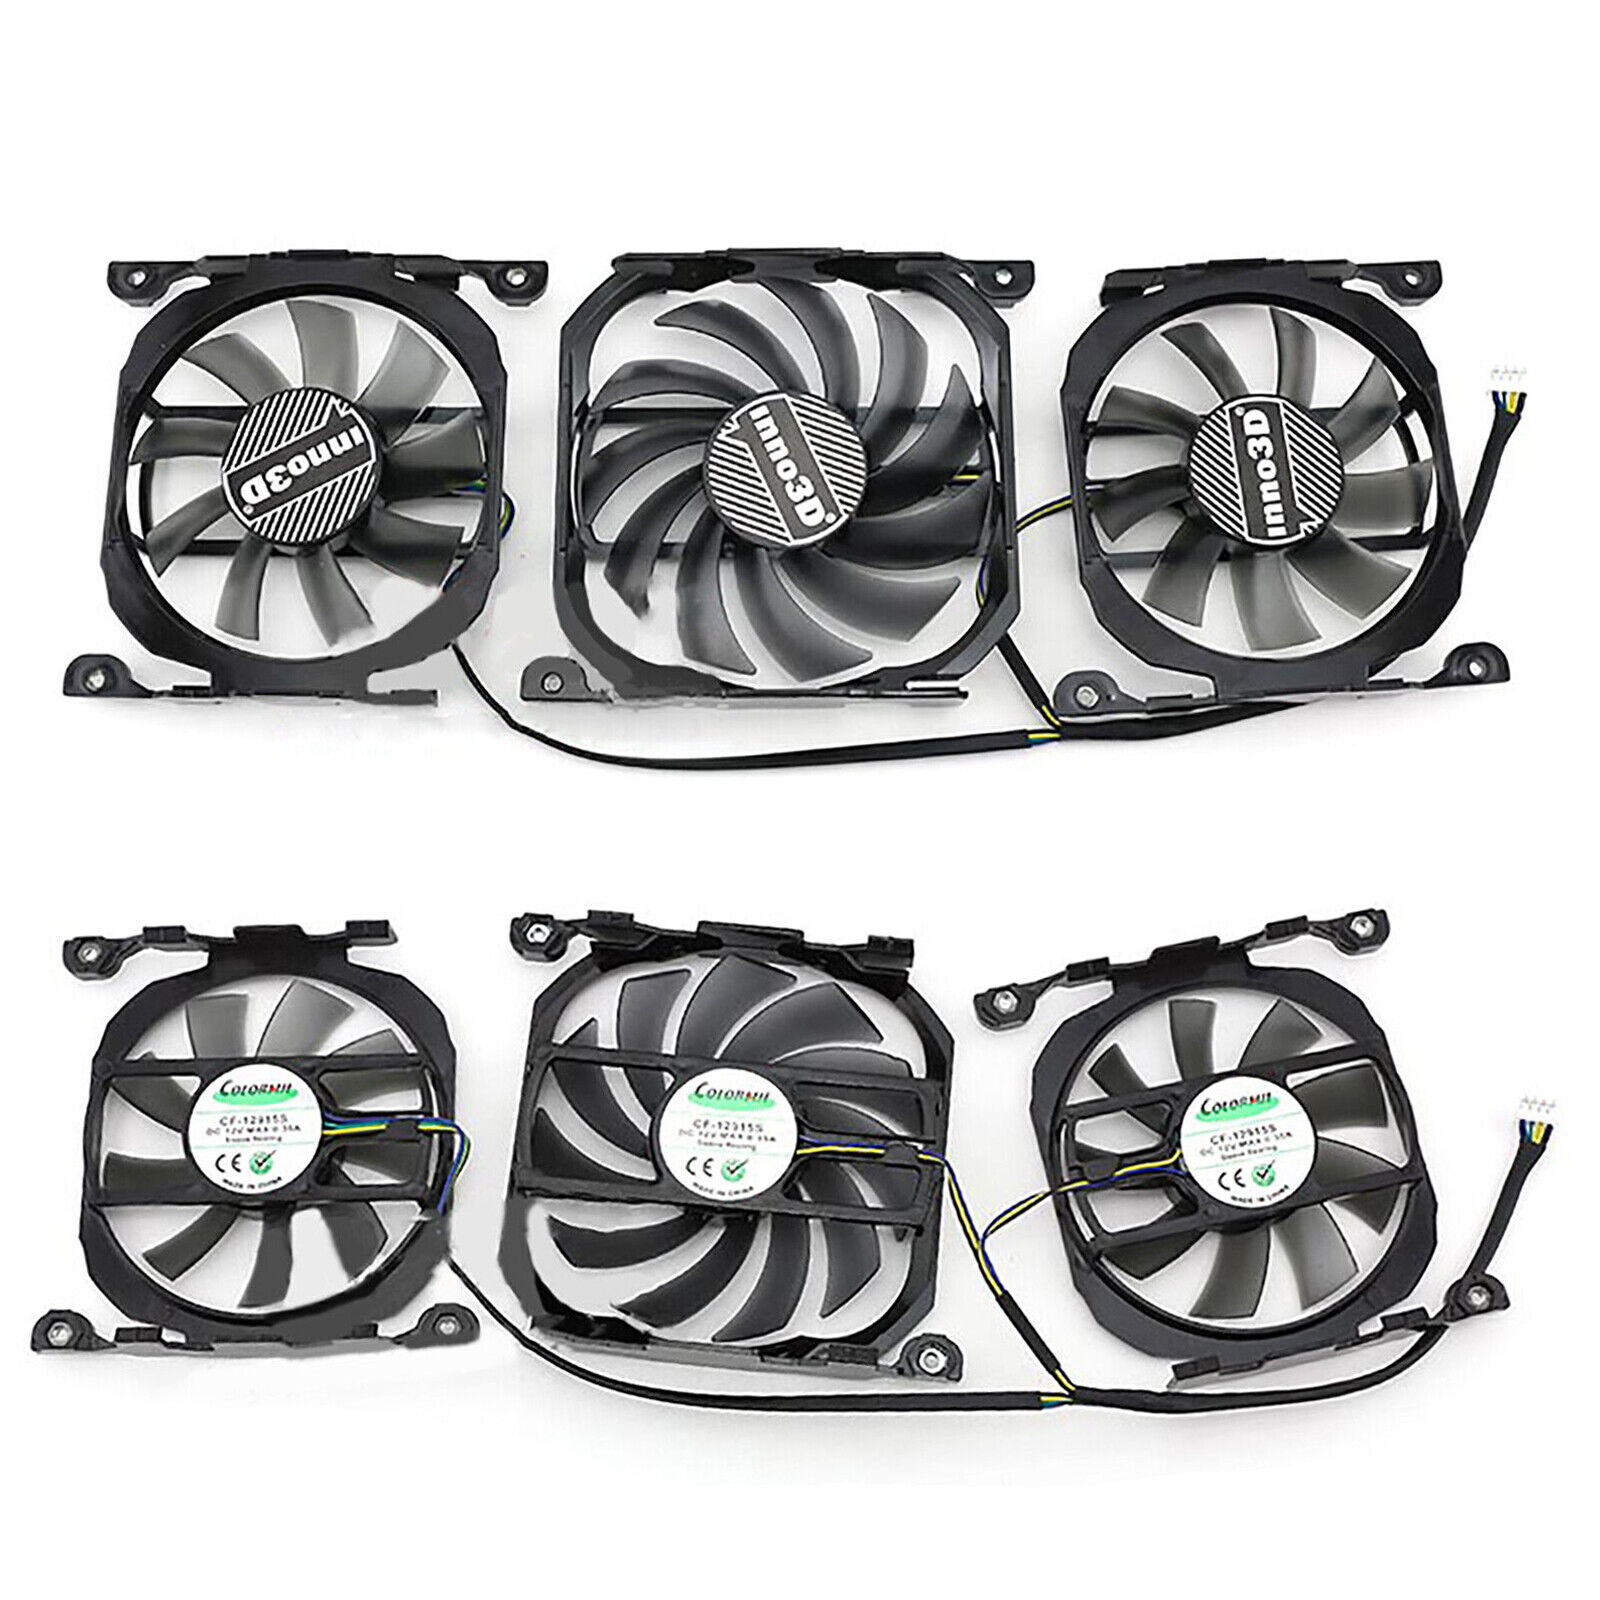 Graphics Card Cooling Fan for Yeston R9 290 R9 280X Game Master